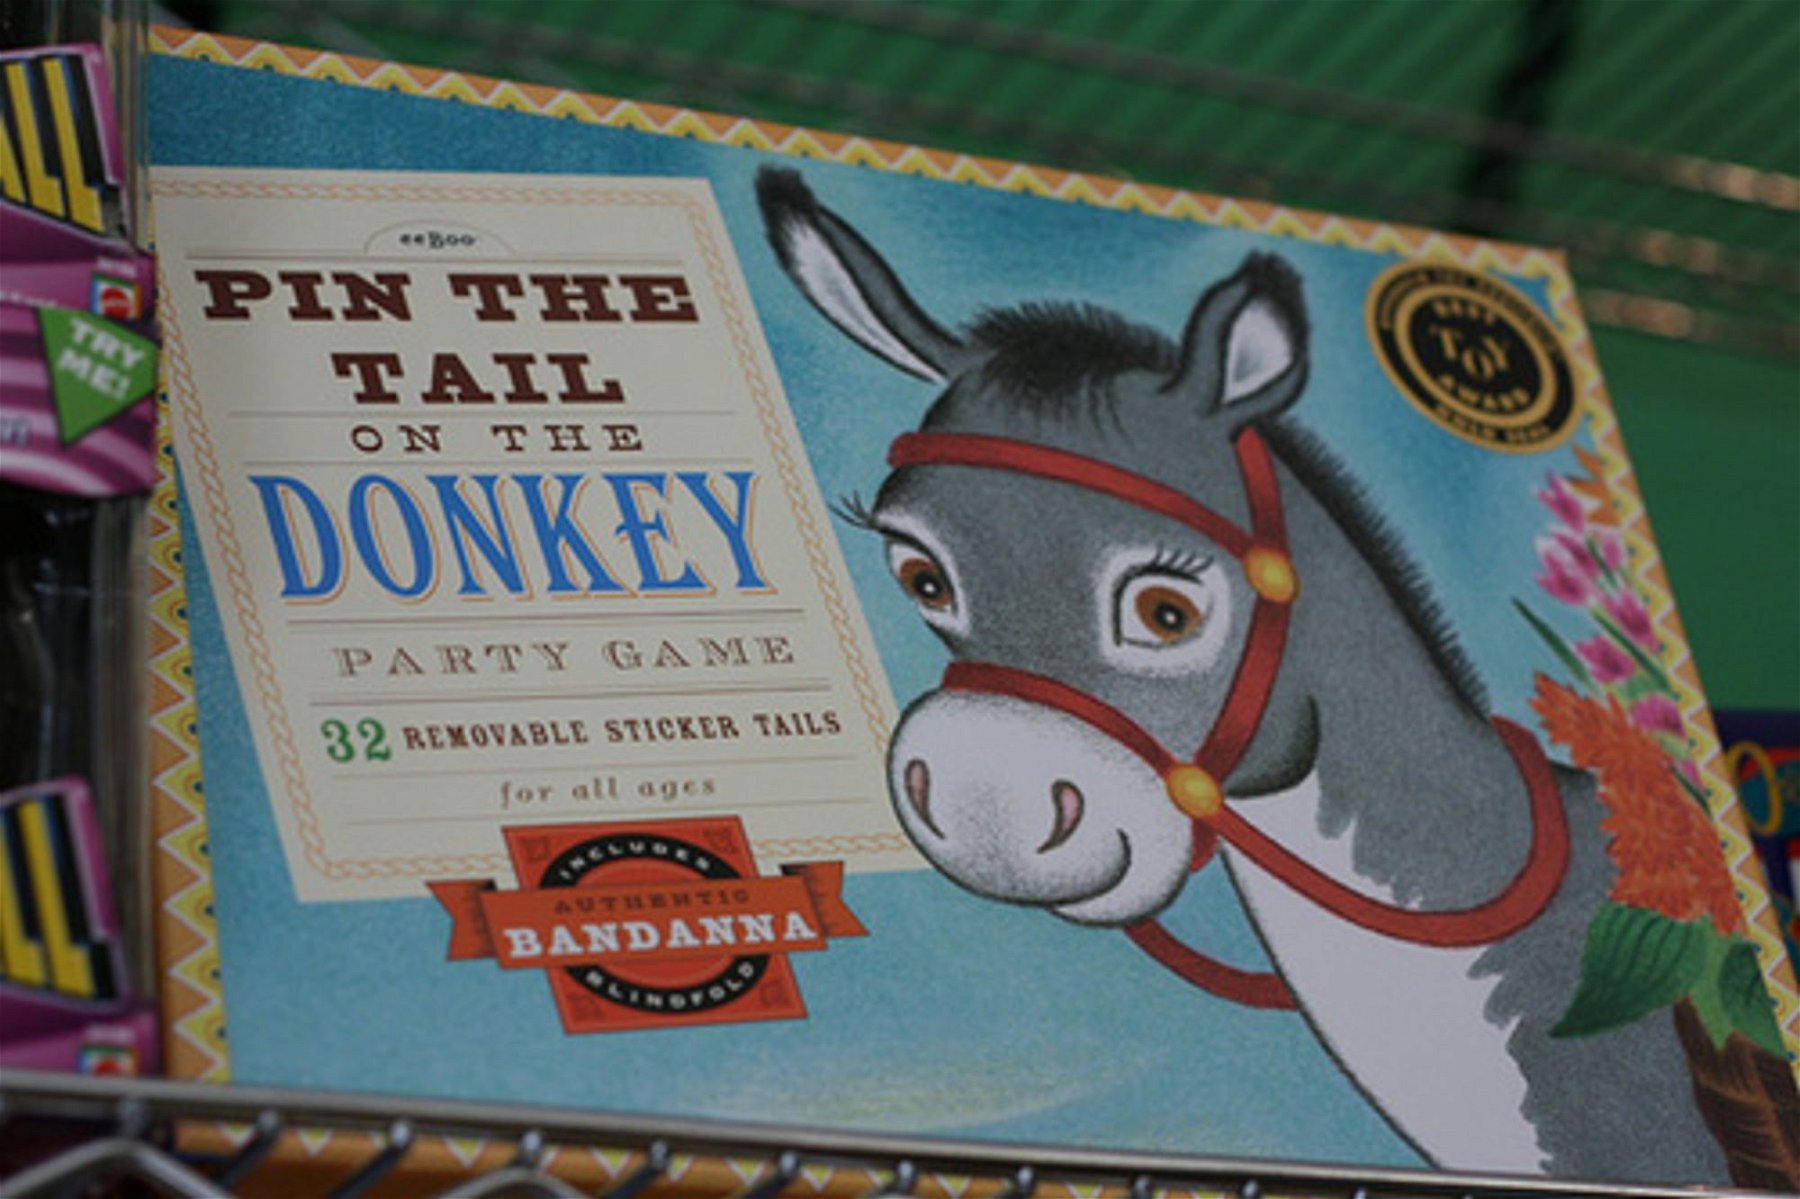 Are You Trying to Pin the Tail on the Cloud Donkey?